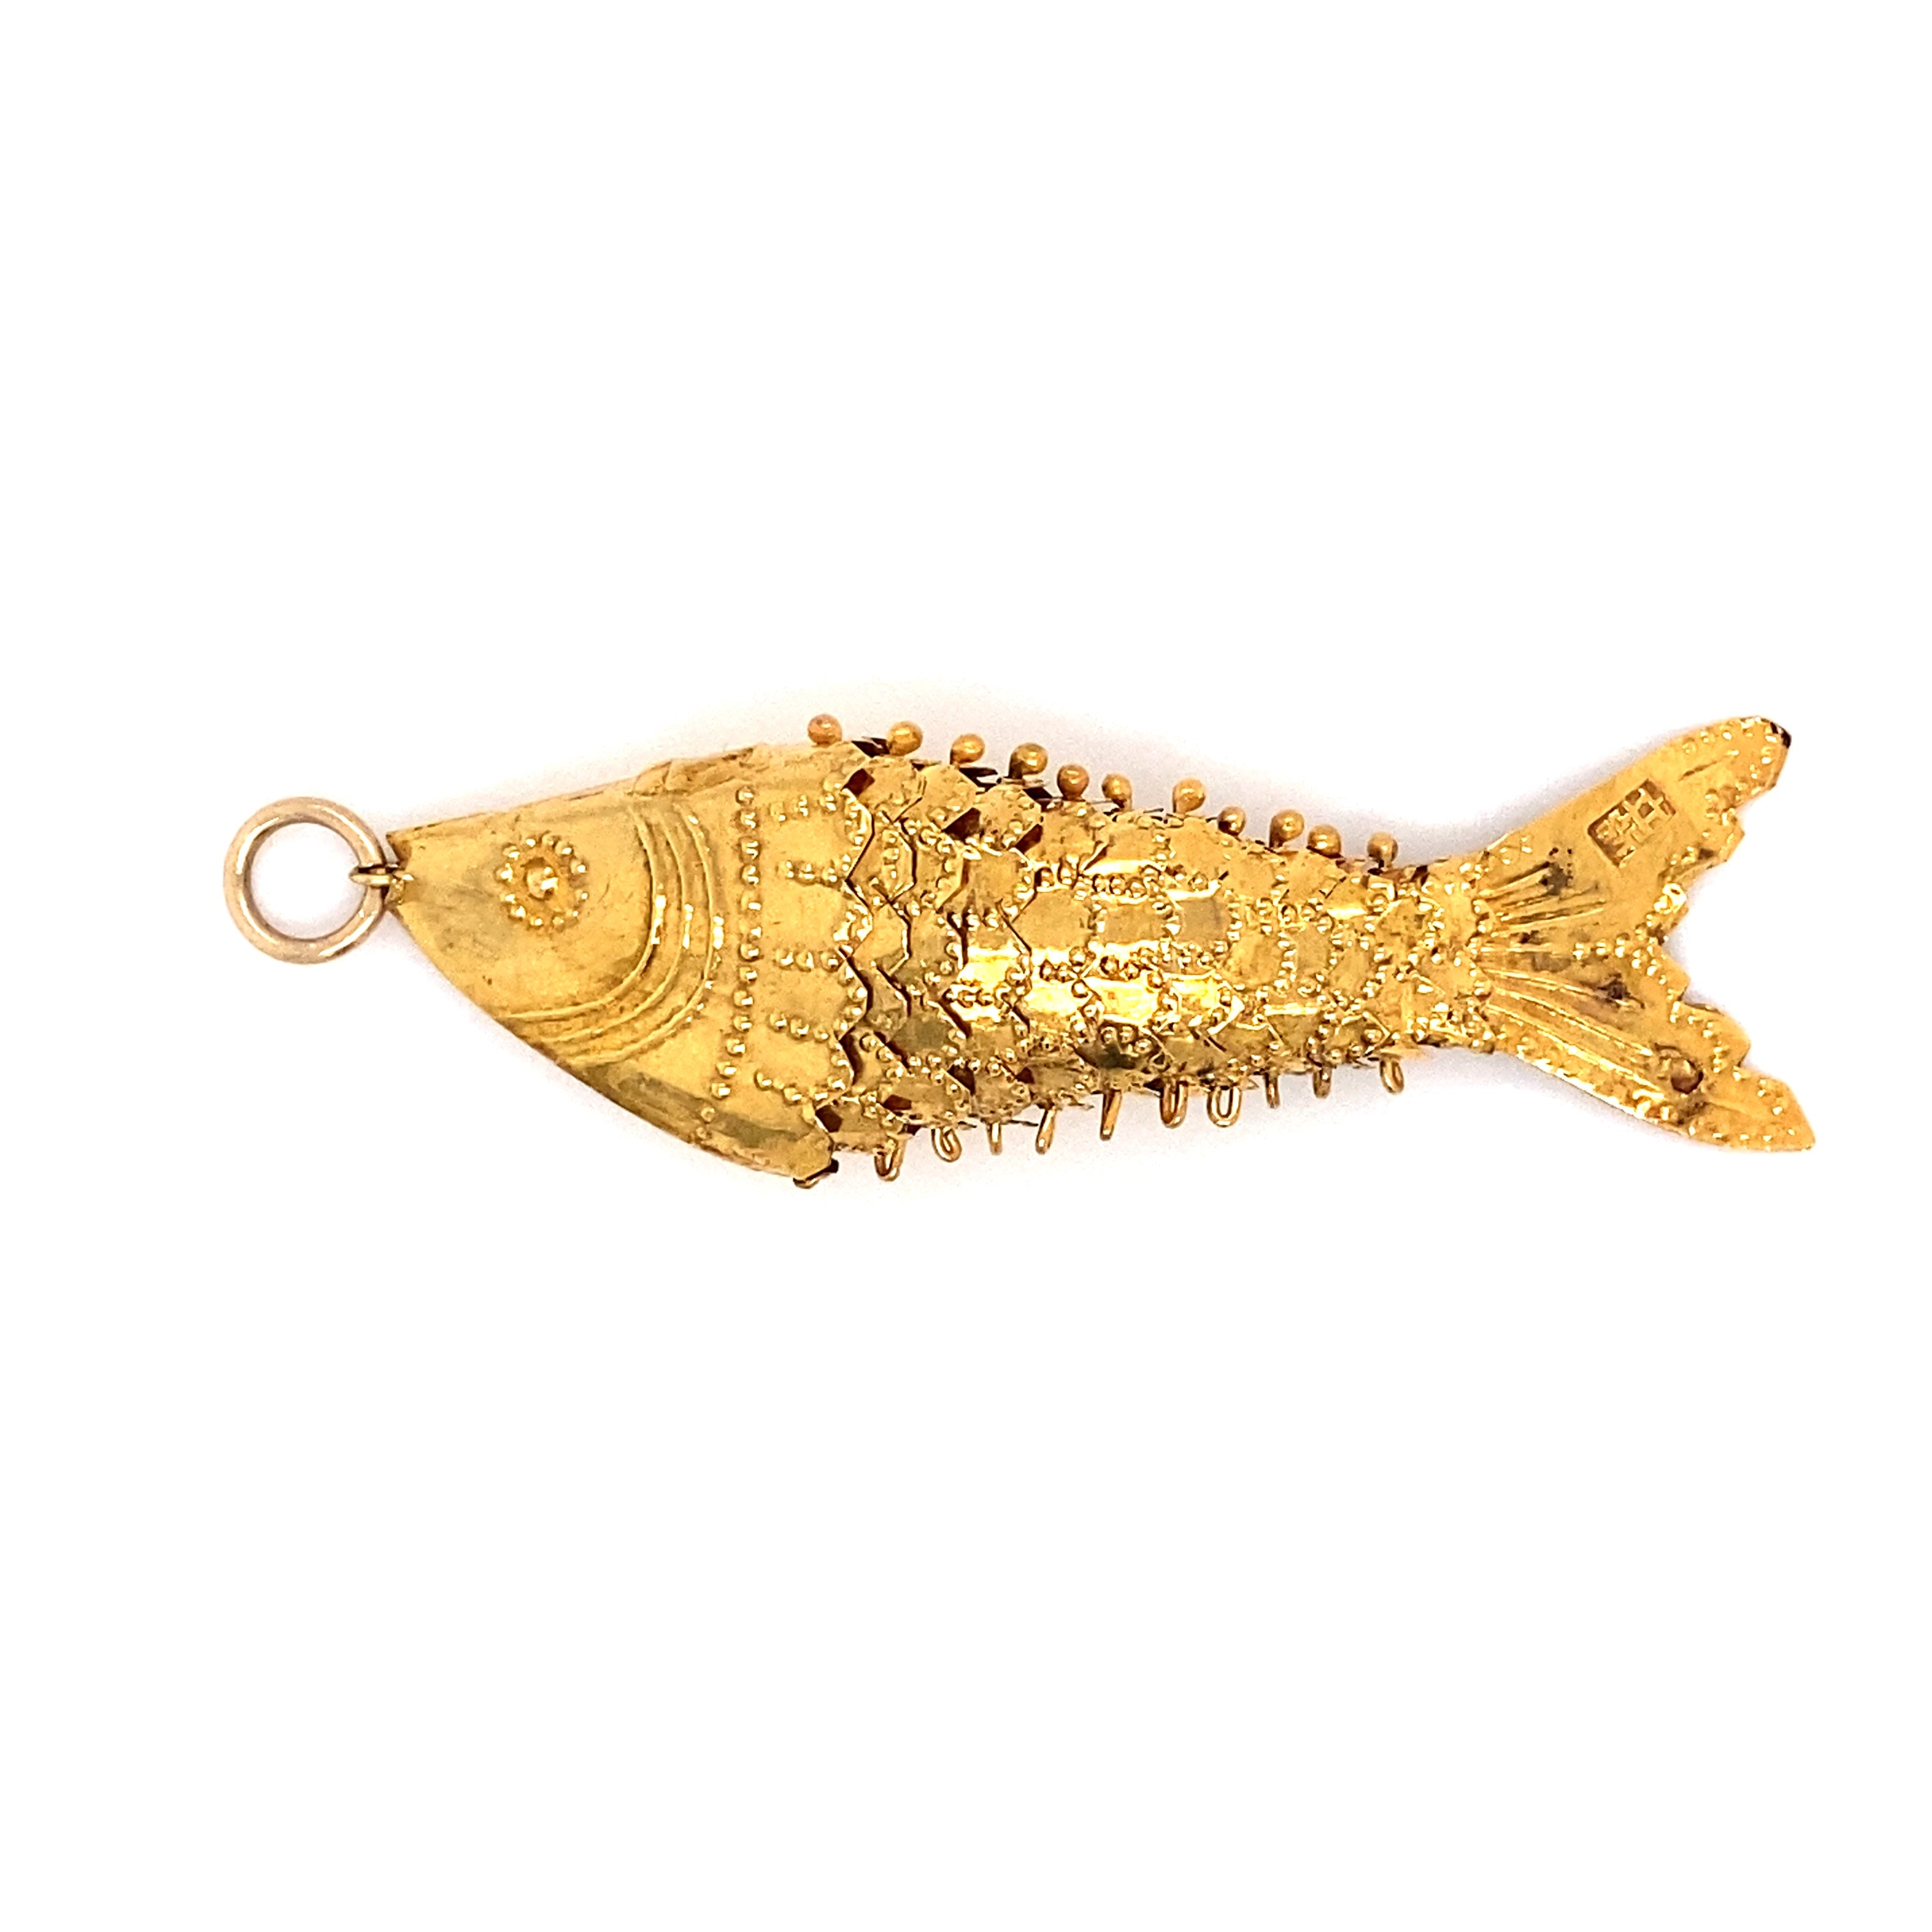 Circa 1980s Chinese Articulated Fish Pendant in 18K Gold – The Verma Group